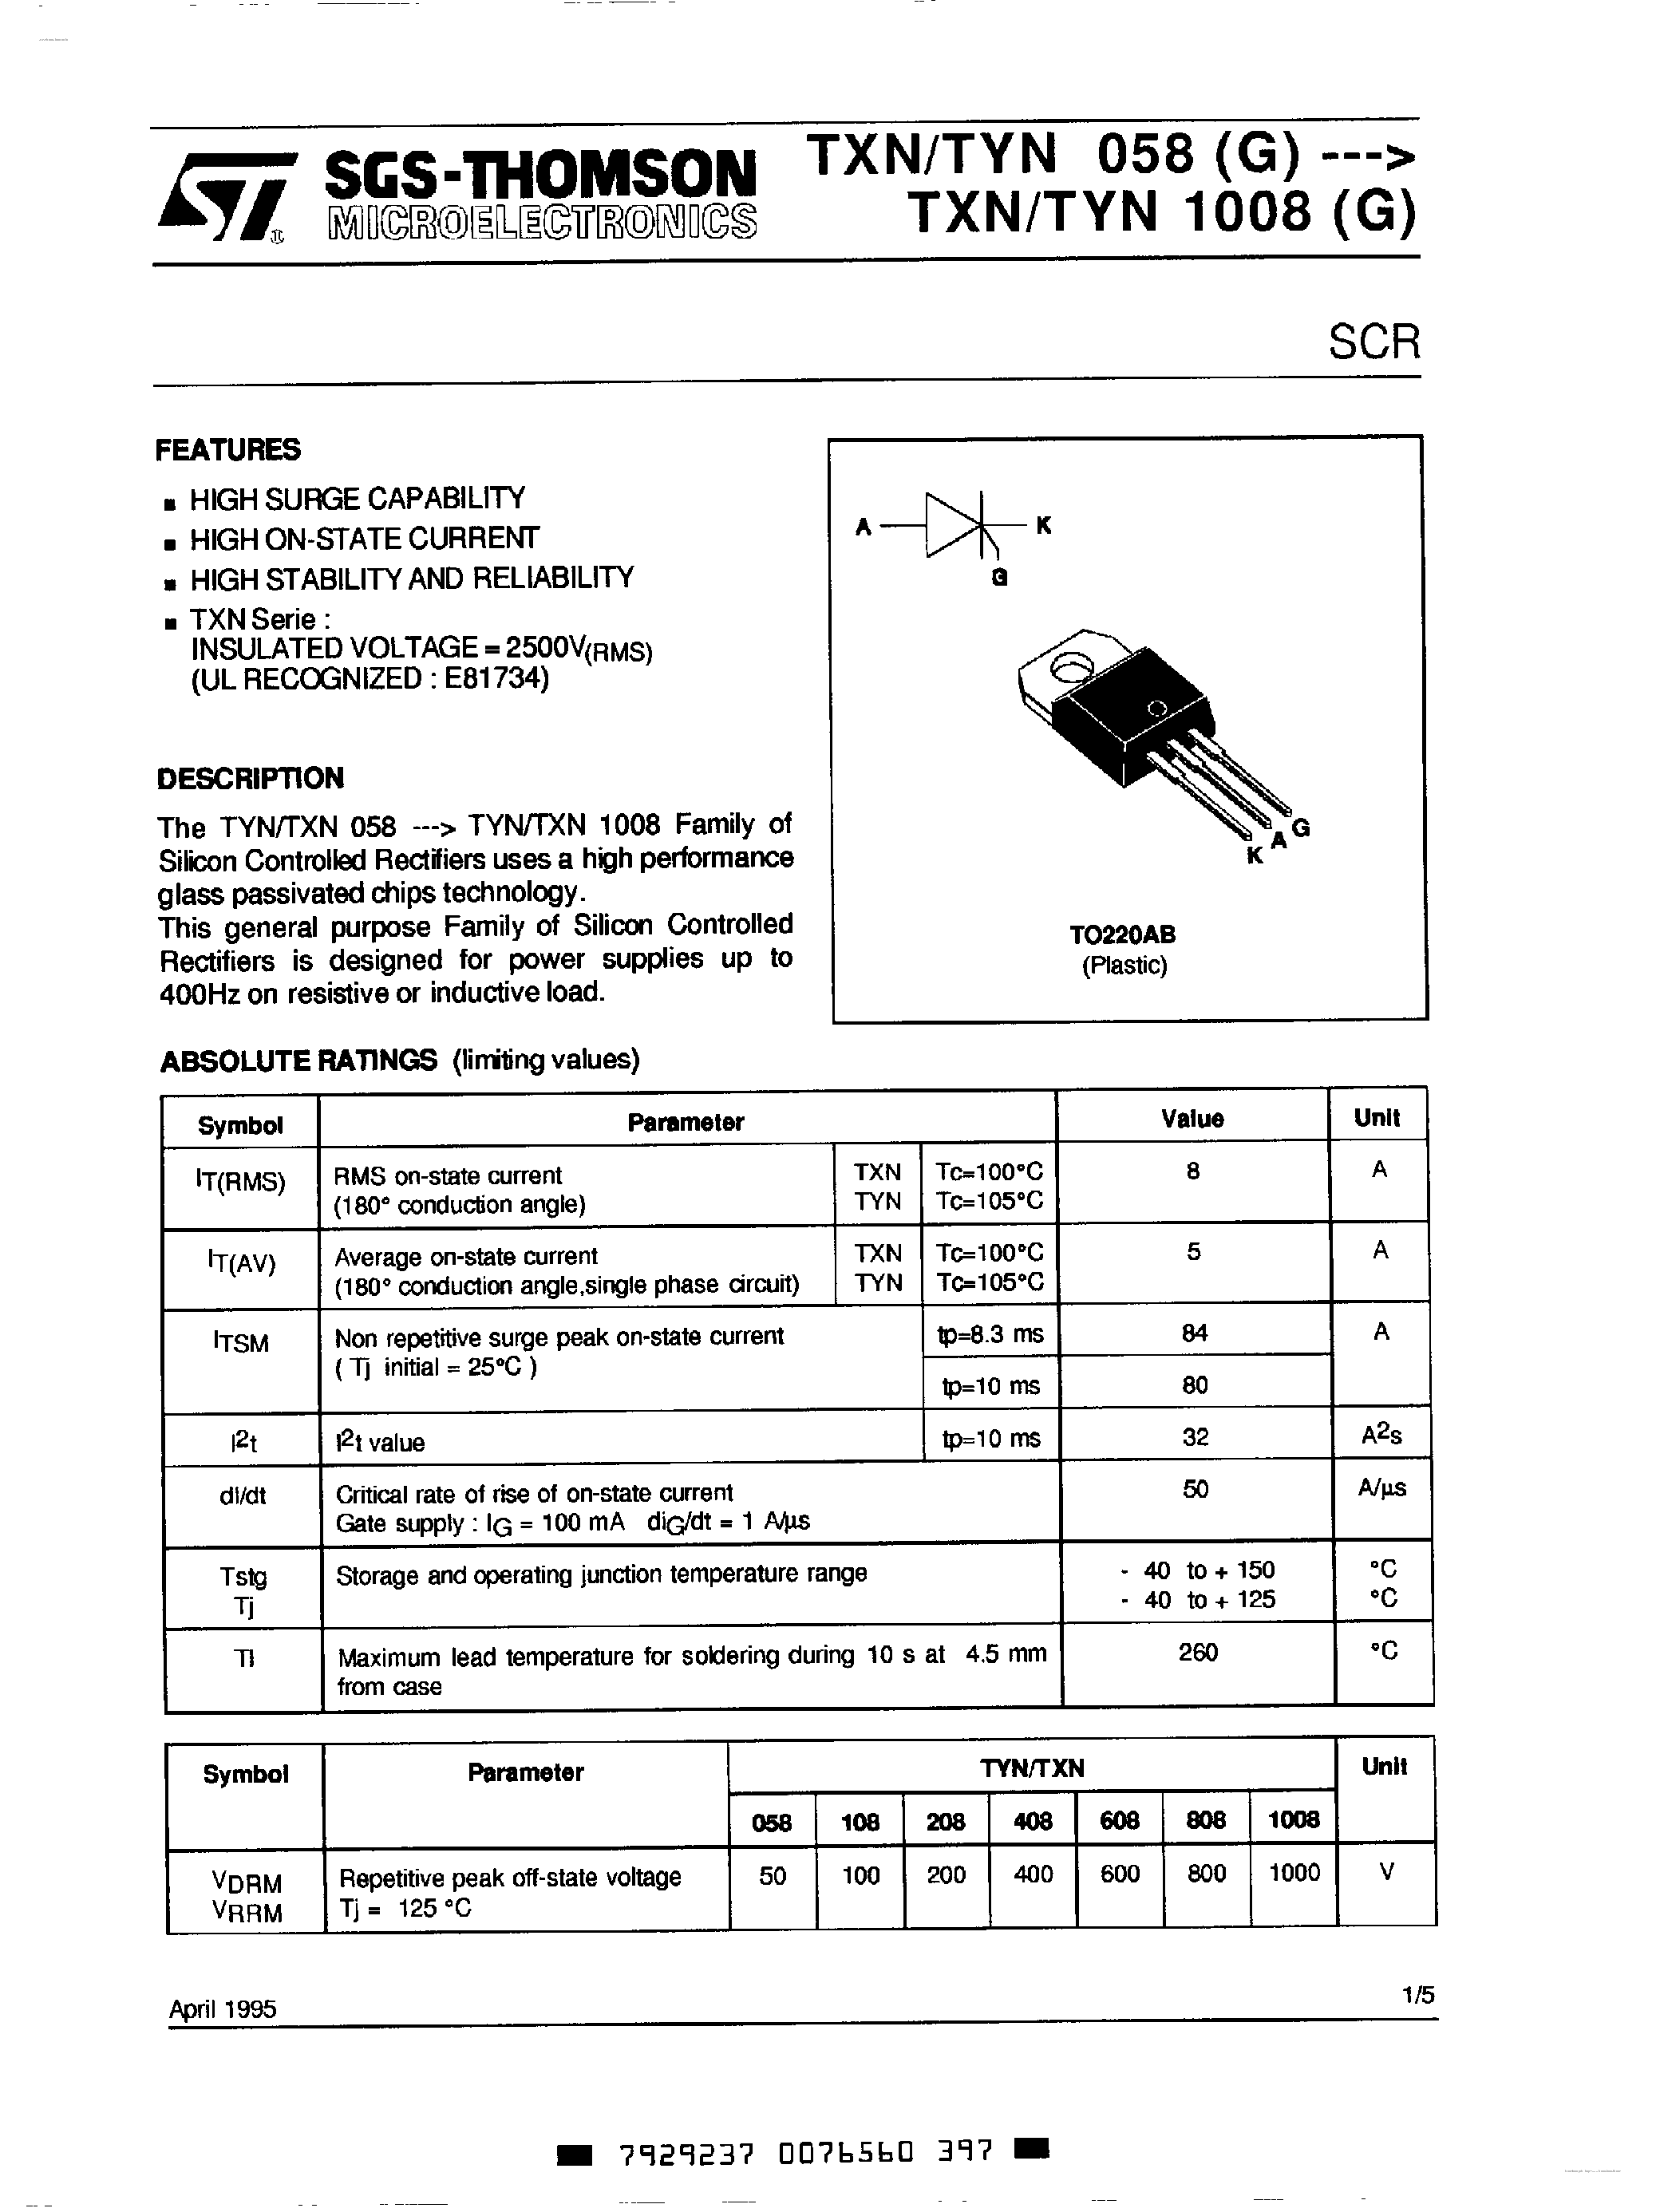 Datasheet TYN058 - Silicon controlled rectifiers page 1